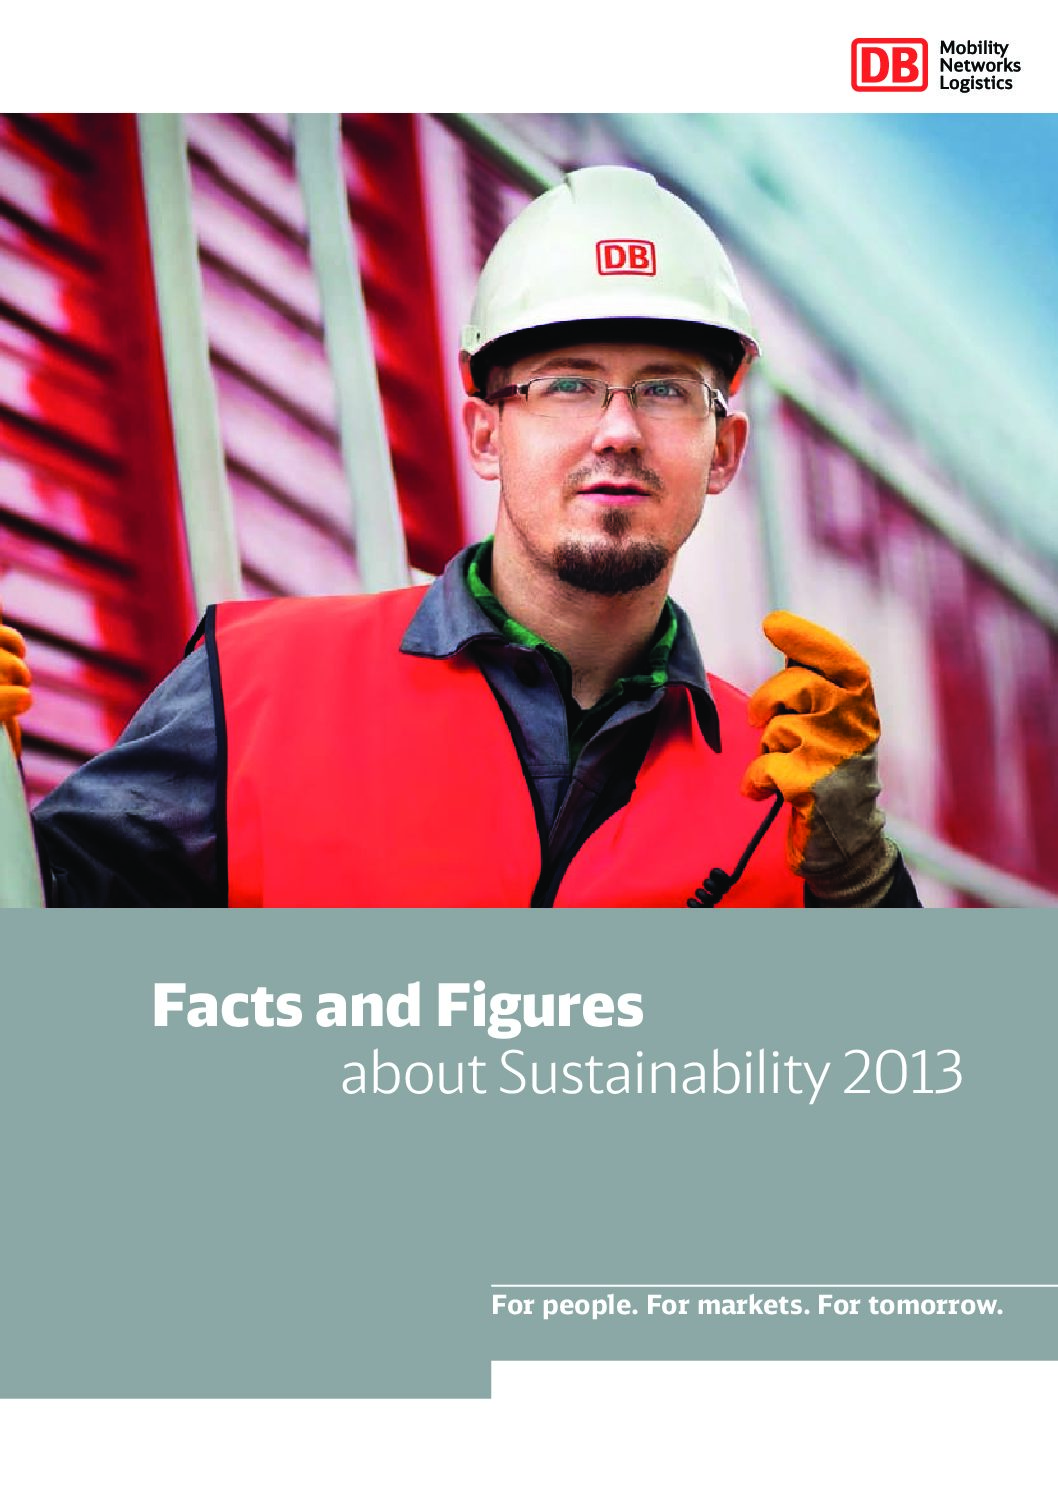 Facts and Figures about Sustainability DB Schenker 2013 pdf